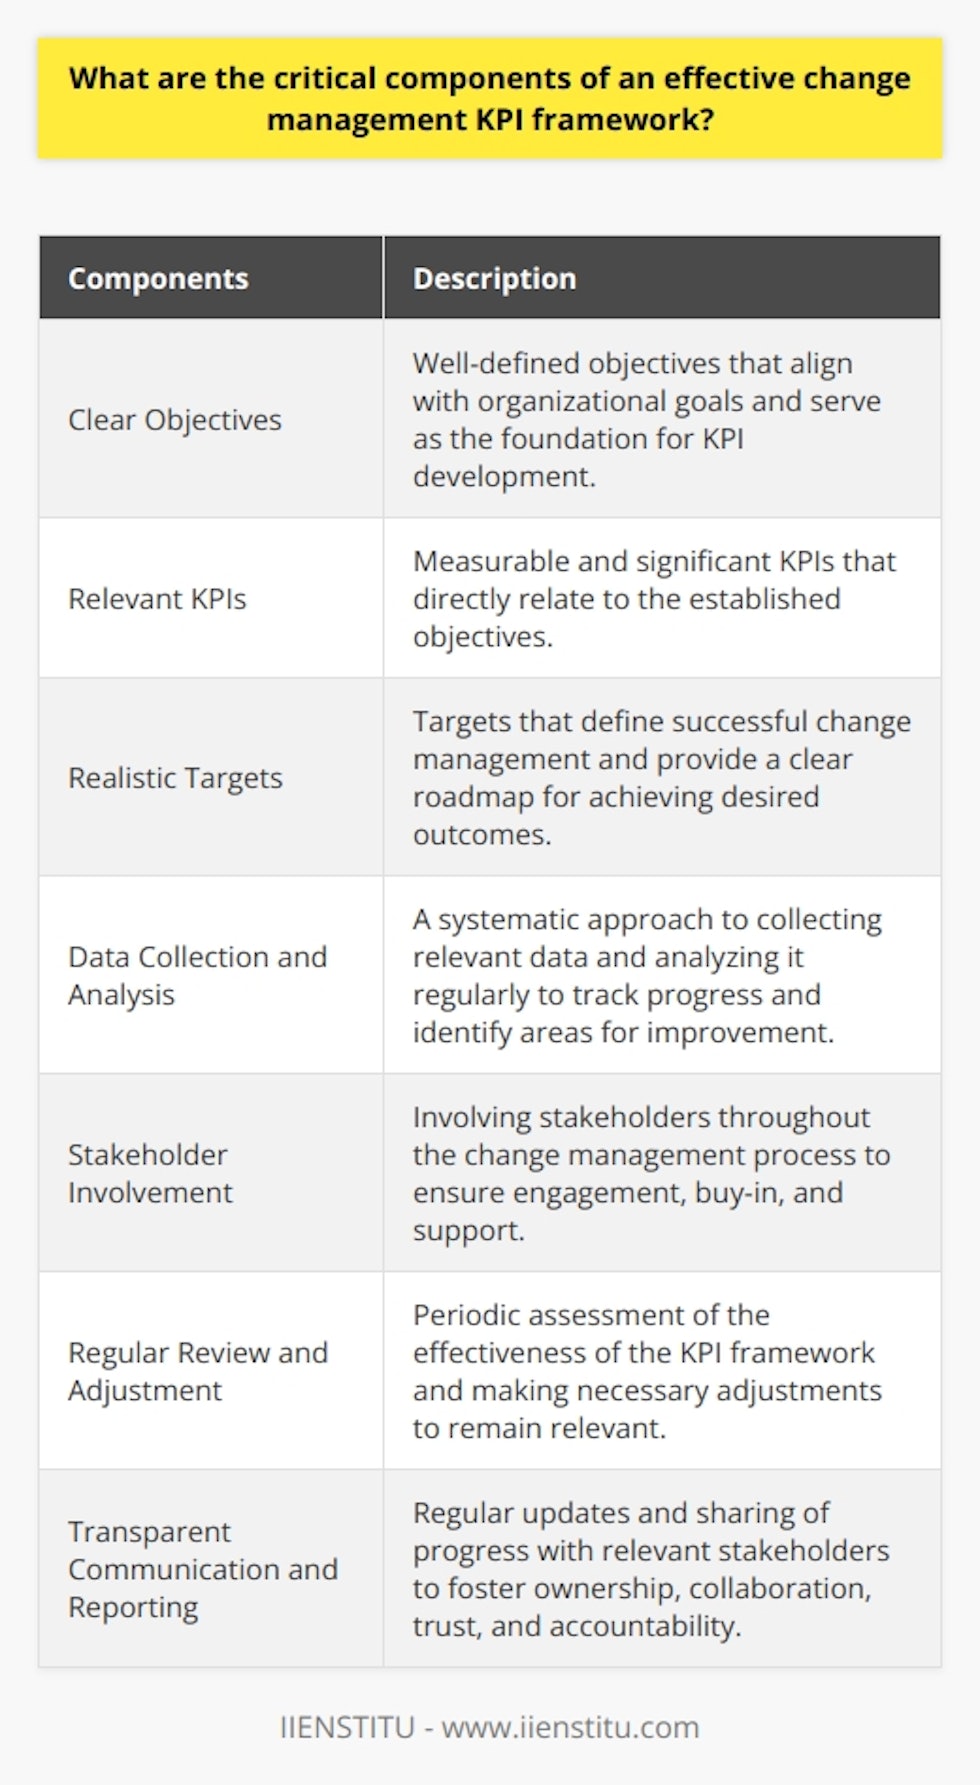 An effective change management KPI framework consists of several critical components that work together to ensure successful change within an organization. These components include establishing clear objectives, selecting relevant KPIs, setting targets, data collection and analysis, involving stakeholders, regular review and adjustment, and transparent communication and reporting.Firstly, establishing clear and well-defined objectives is crucial. These objectives should align with the overall goals of the organization and serve as the foundation upon which the KPIs are developed. By having clear objectives in place, organizations can effectively measure the progress and success of their change management initiatives.Next, it is essential to select relevant KPIs that directly relate to the established objectives. These KPIs should be measurable and significant, enabling organizations to track and assess the progress of their change management efforts accurately. By selecting the right KPIs, organizations can ensure that they are measuring the right things and gaining valuable insights into the effectiveness of their change management strategies.Setting targets for each identified KPI is another critical component of an effective change management KPI framework. These targets define what successful change management looks like and provide a clear roadmap for achieving the desired outcomes. It is important for these targets to be realistic and attainable, as overly ambitious targets can lead to frustration and a lack of motivation.Data collection and analysis play a significant role in an efficient KPI framework. Organizations must have a systematic approach to collecting relevant data and analyzing it regularly. This allows them to track progress, identify areas that require improvement, and make informed decisions about adjusting their change management strategies as necessary.Involving stakeholders throughout the change management process is essential for success. Stakeholders play a vital role in the implementation of changes and ensuring continuous engagement. Their buy-in and support contribute to the smooth execution of the change initiative and help create a positive culture of change within the organization.Regular review and adjustment are crucial due to the dynamic nature of organizations and the need for constant adaptation. Reviewing the KPI framework allows organizations to assess its effectiveness and make any necessary adjustments. This ensures that the framework remains relevant and aligned with the changing needs and circumstances of the organization.Transparent communication and reporting are vital in a robust change management KPI framework. Regular updates on progress should be shared with all relevant stakeholders, fostering a sense of ownership and encouraging collaboration in achieving the change objectives. This open communication helps to build trust and accountability within the organization.In conclusion, an effective change management KPI framework consists of clear objectives, relevant KPIs, realistic targets, systematic data collection and analysis, stakeholder involvement, regular review and adjustment, and transparent communication and reporting. These components work together to enable organizations to navigate change successfully and achieve their overall goals.